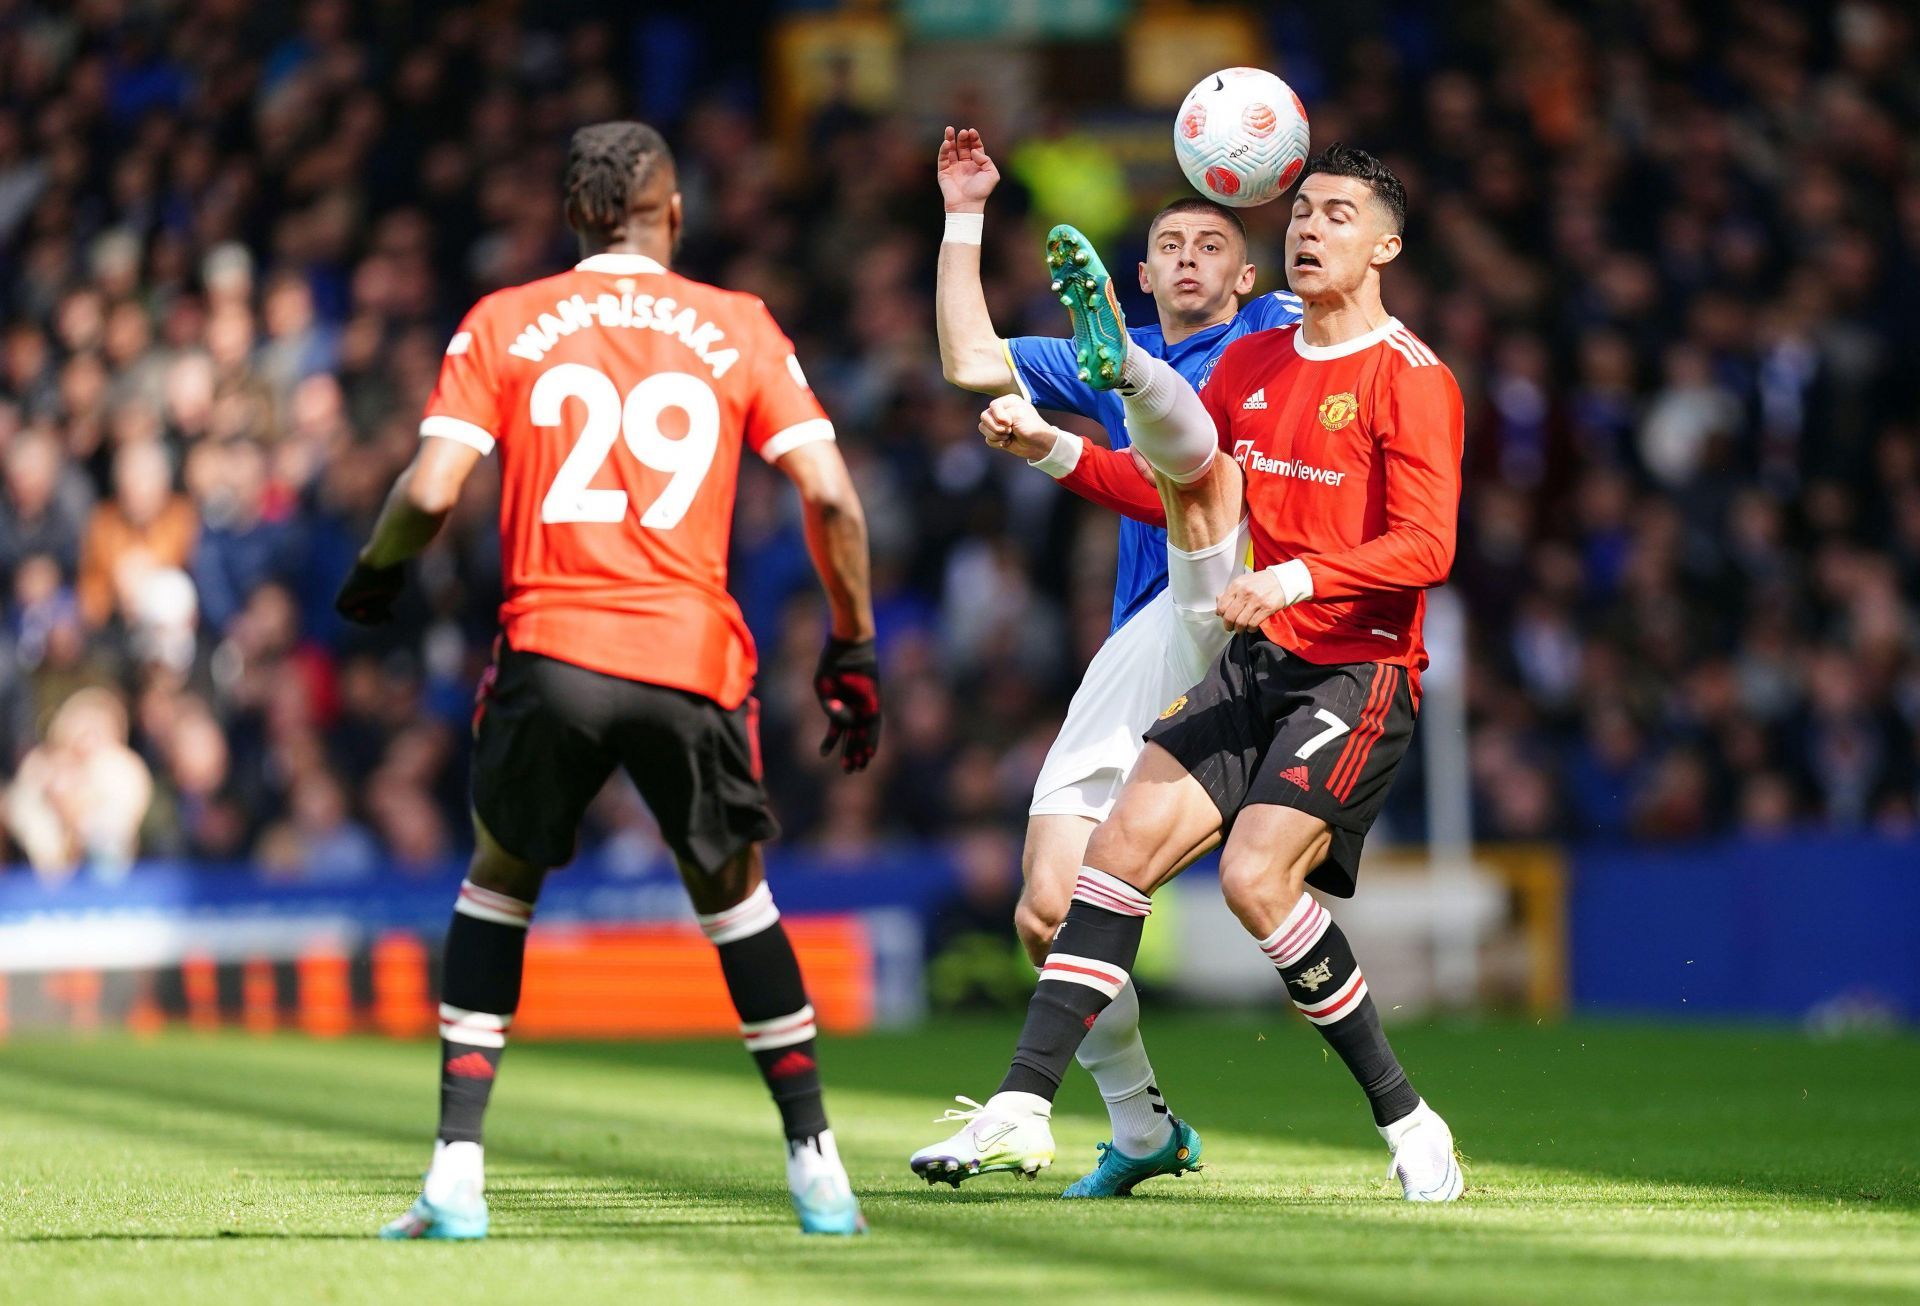 Manchester United suffered a 1-0 defeat at the hands of Everton in the Premier League